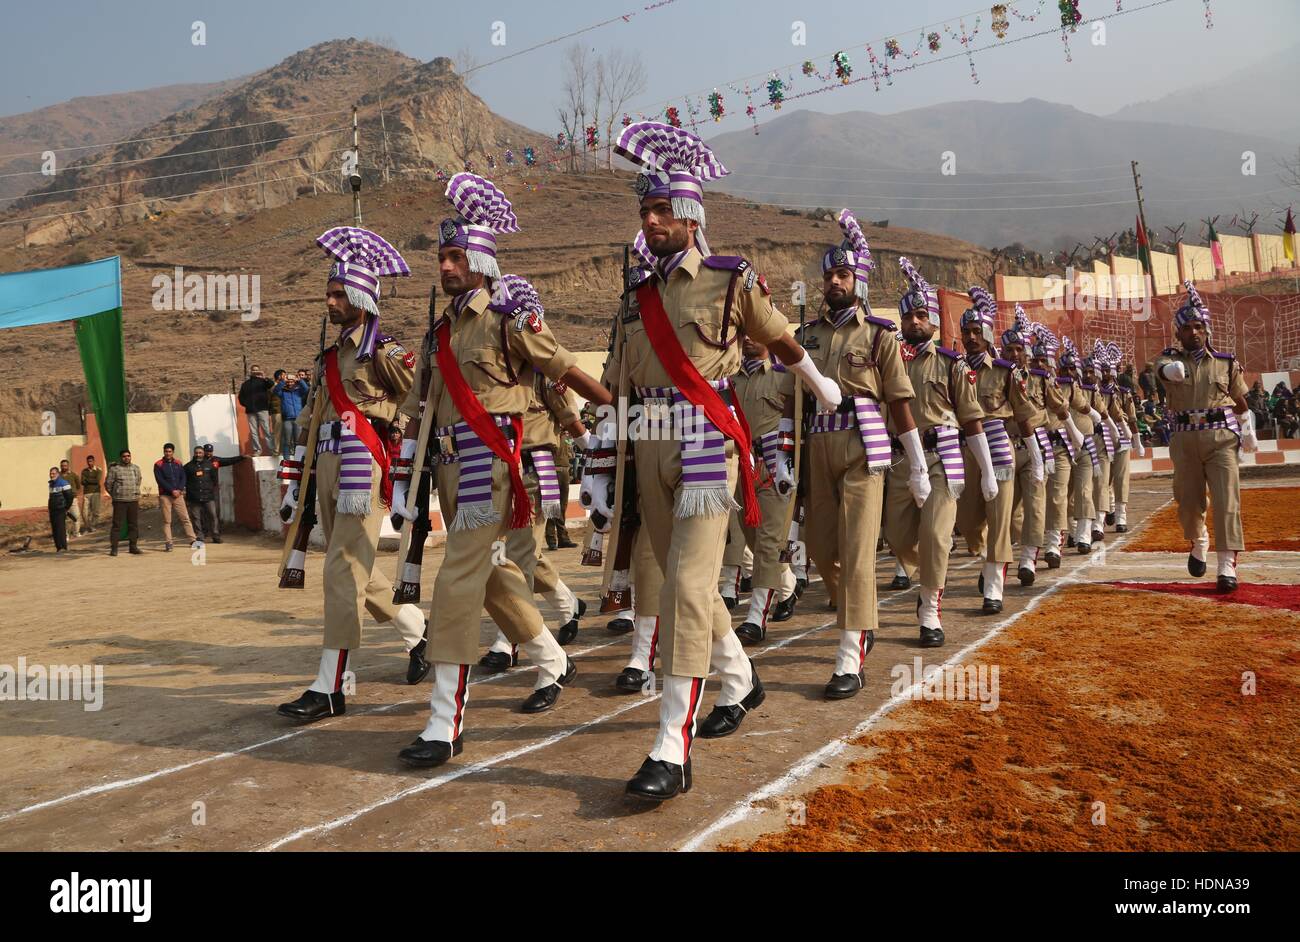 Srinagar, Kashmir. 14th Dec, 2016. Recruits of Indian police march during a passing out parade at a training center in Pulwama district, about 20 km south of Srinagar, summer capital of Kashmir, Dec. 14, 2016. A total of 355 recruits were formally inducted into the Indian police after completing nine months of training in physical fitness, weapon handling, commando operations and counter insurgency, a police spokesman said. Credit:  Javed Dar/Xinhua/Alamy Live News Stock Photo